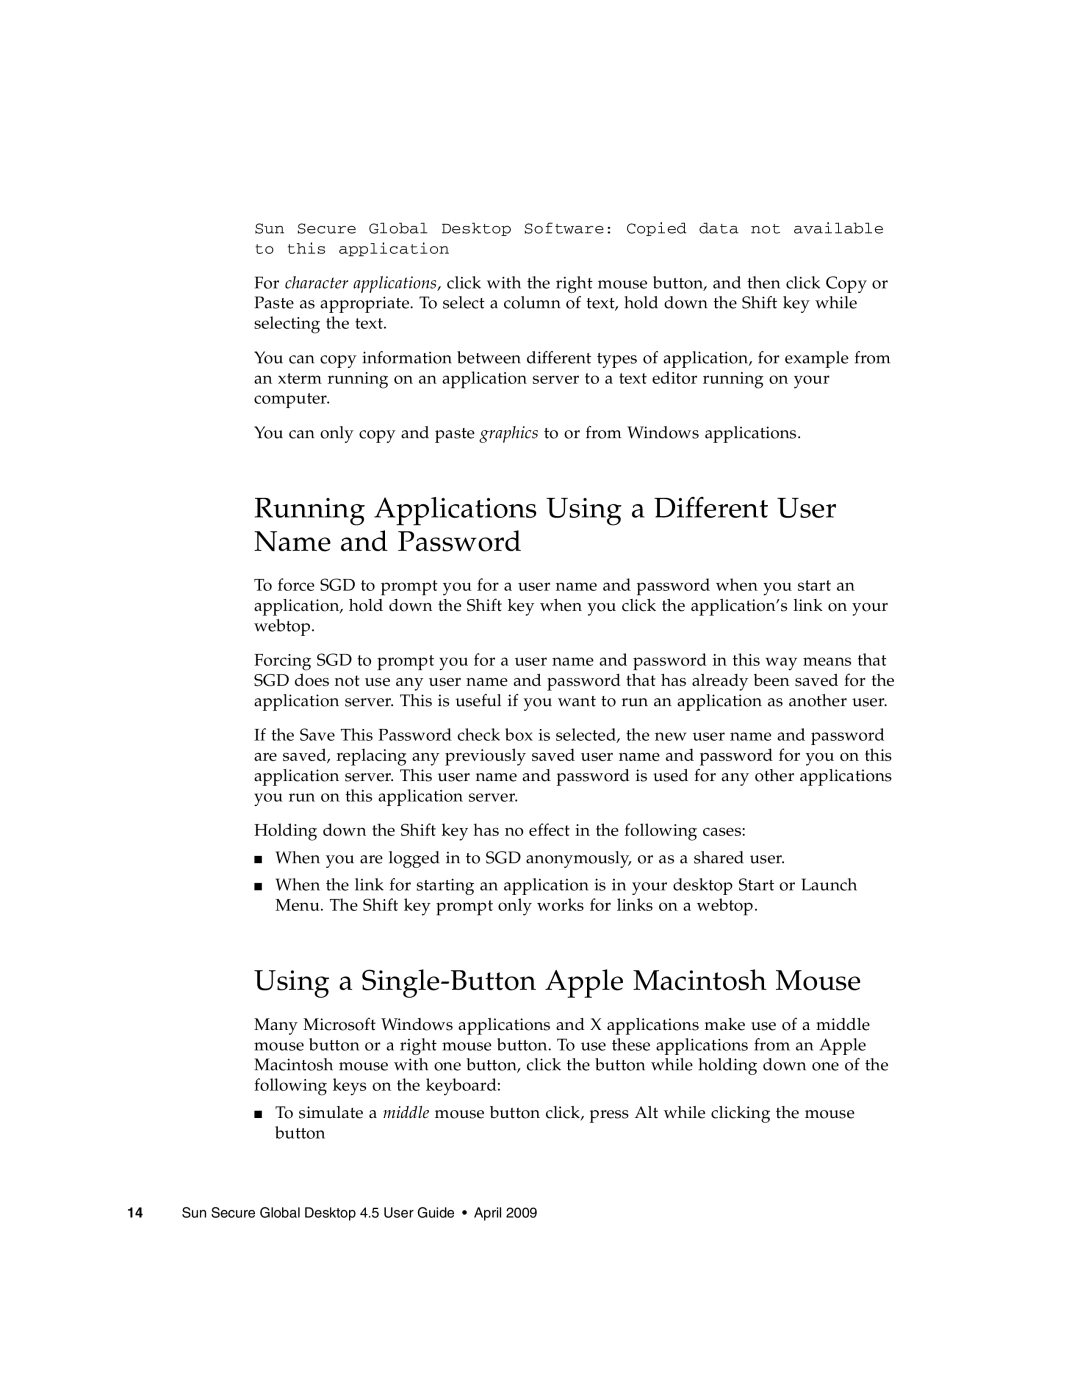 Sun Microsystems 4.5 manual Running Applications Using a Different User Name and Password 